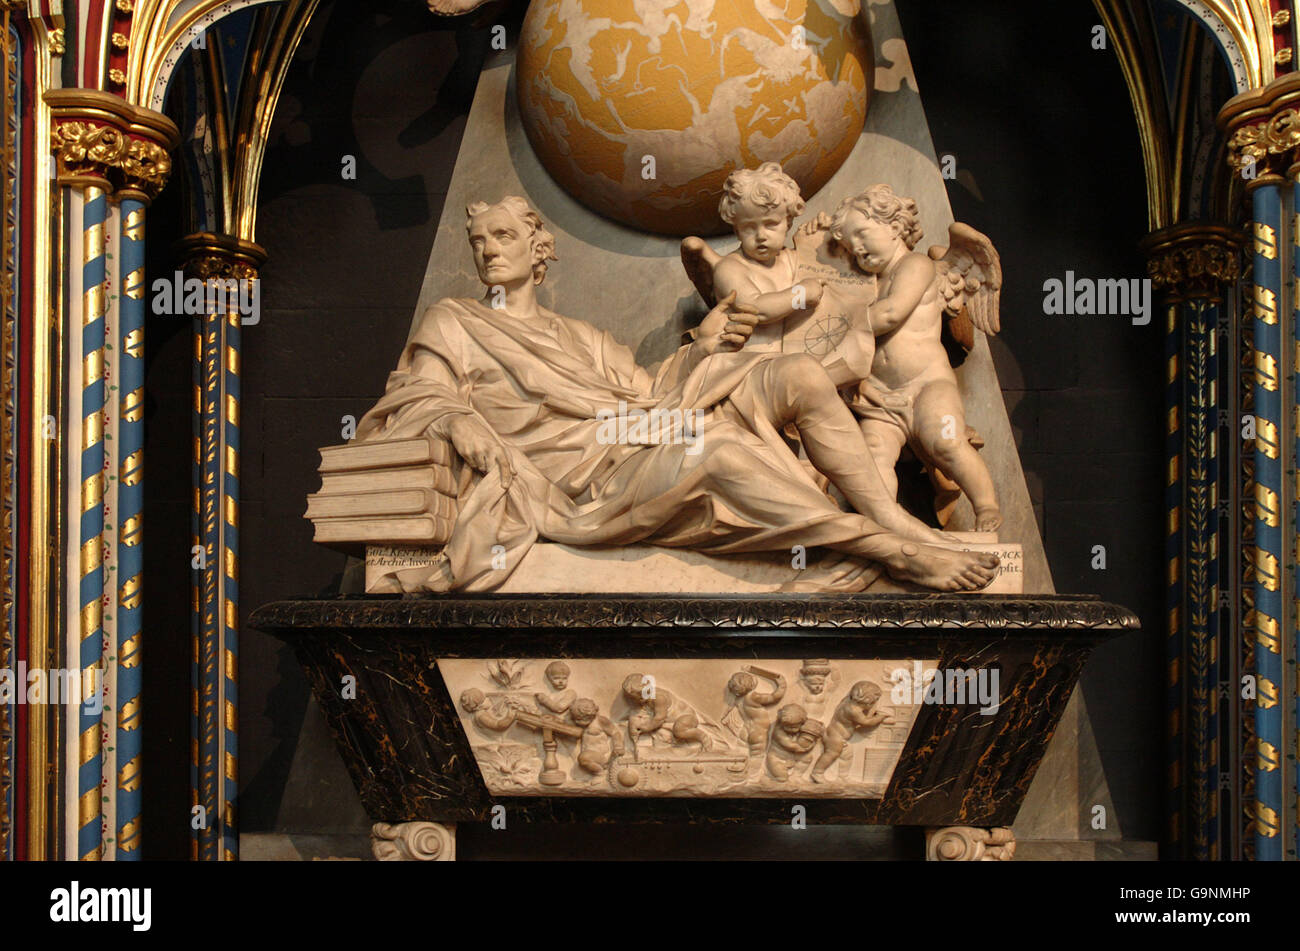 Sir Isaac Newton Tomb In Altar Of Westminster Abbey London Stock Photo ...